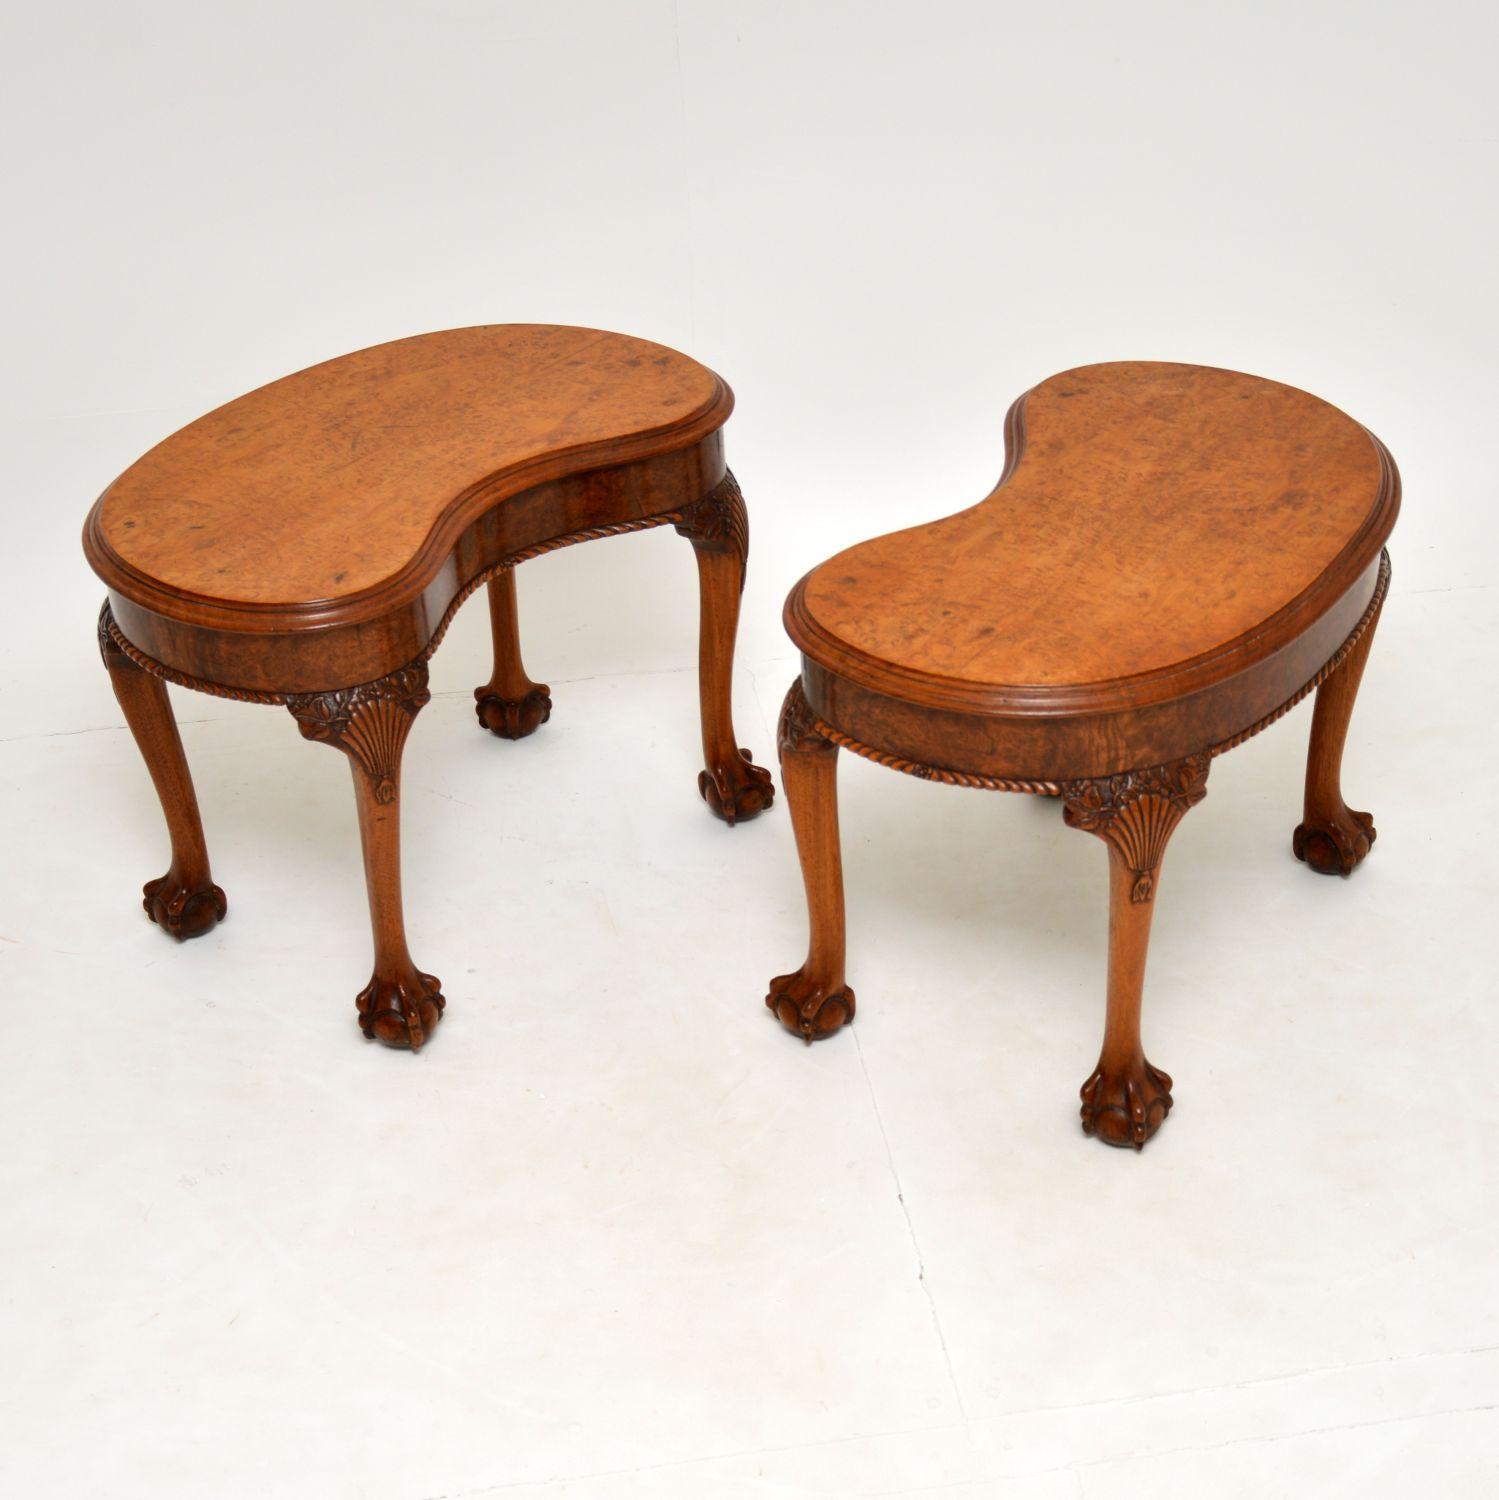 A stunning and very unusual pair of side tables in solid walnut, with beautiful burr walnut veneered tops. These date from the 1900-1920’s period.

They are of amazing quality and are a very useful size. They have fine, deep carvings around the